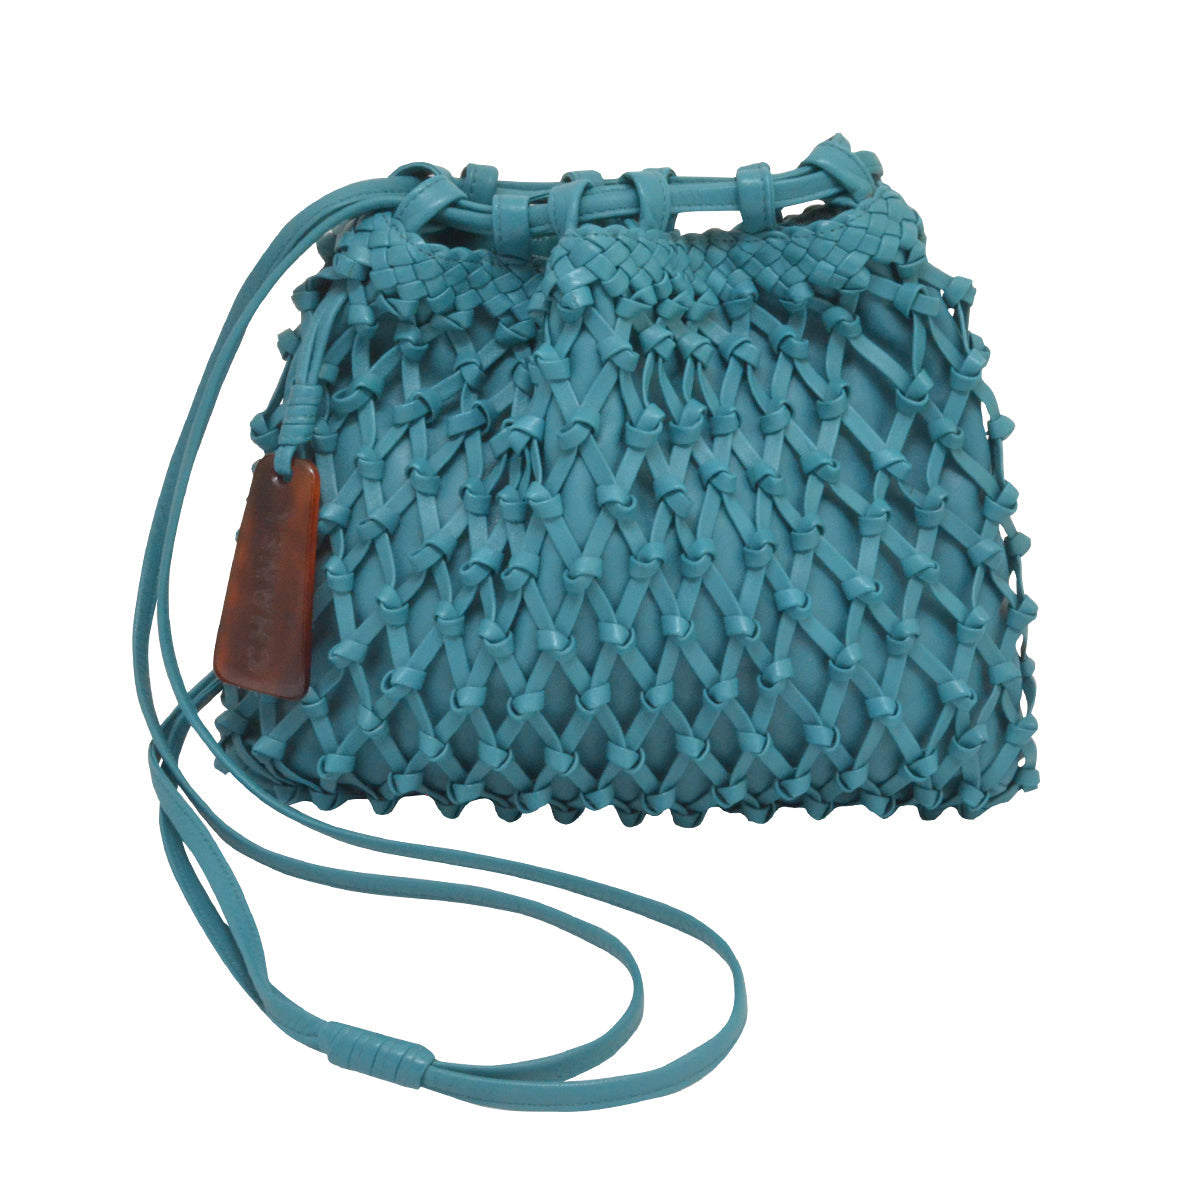 Foxy Couture Carmel | Chanel Teal Leather Knot Bucket Bag